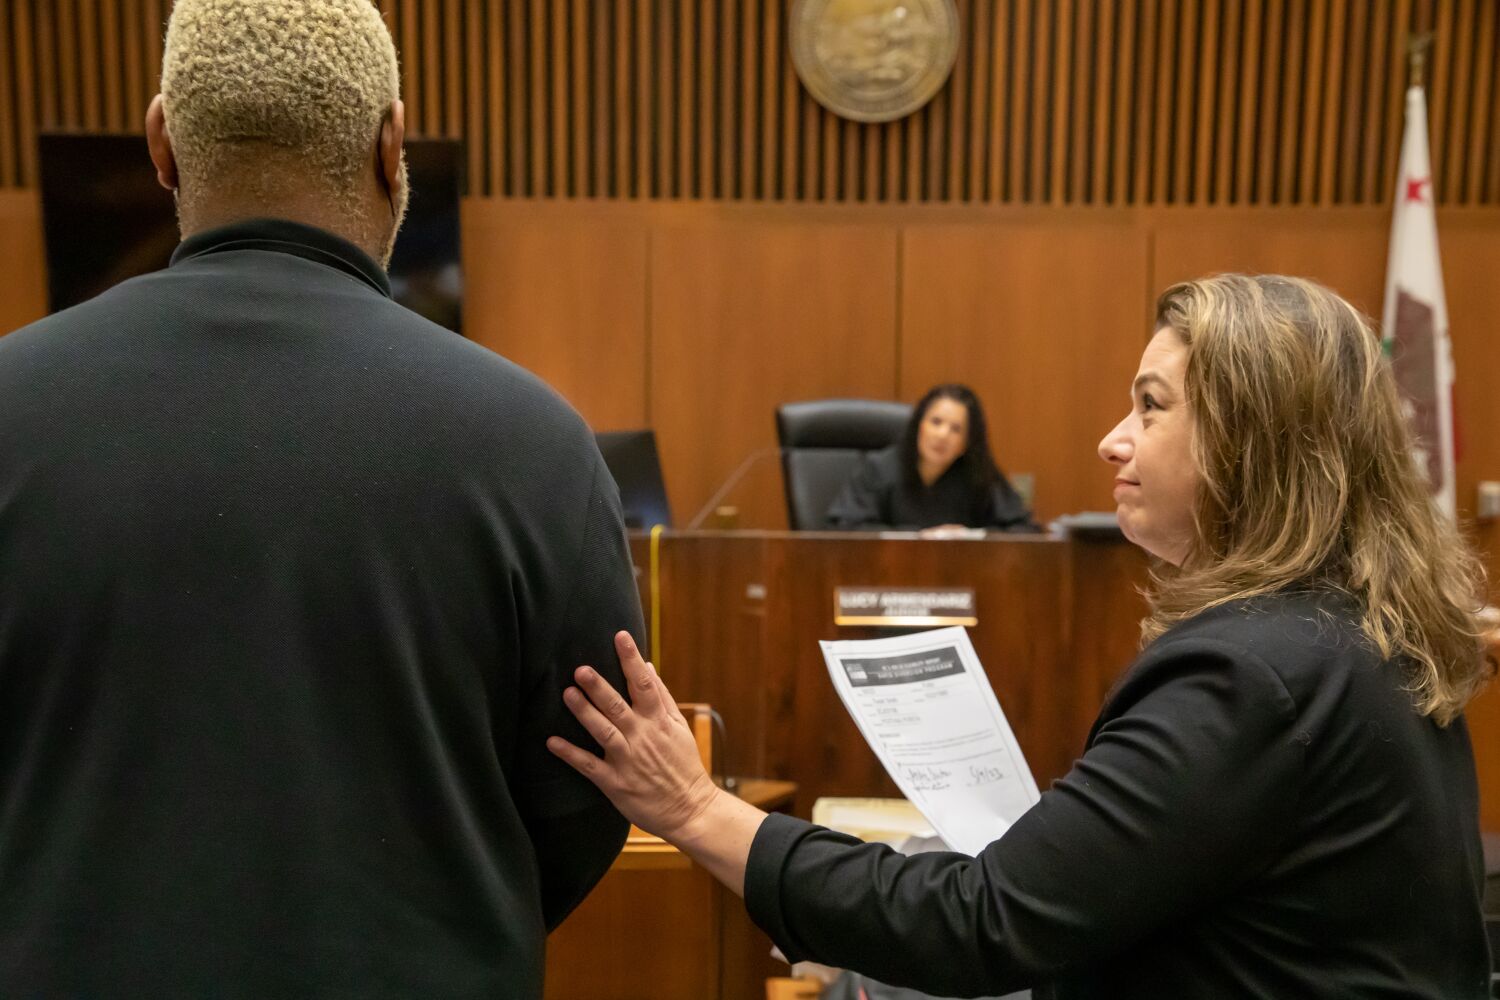 L.A. criminal court program diverts mentally ill offenders from prosecution